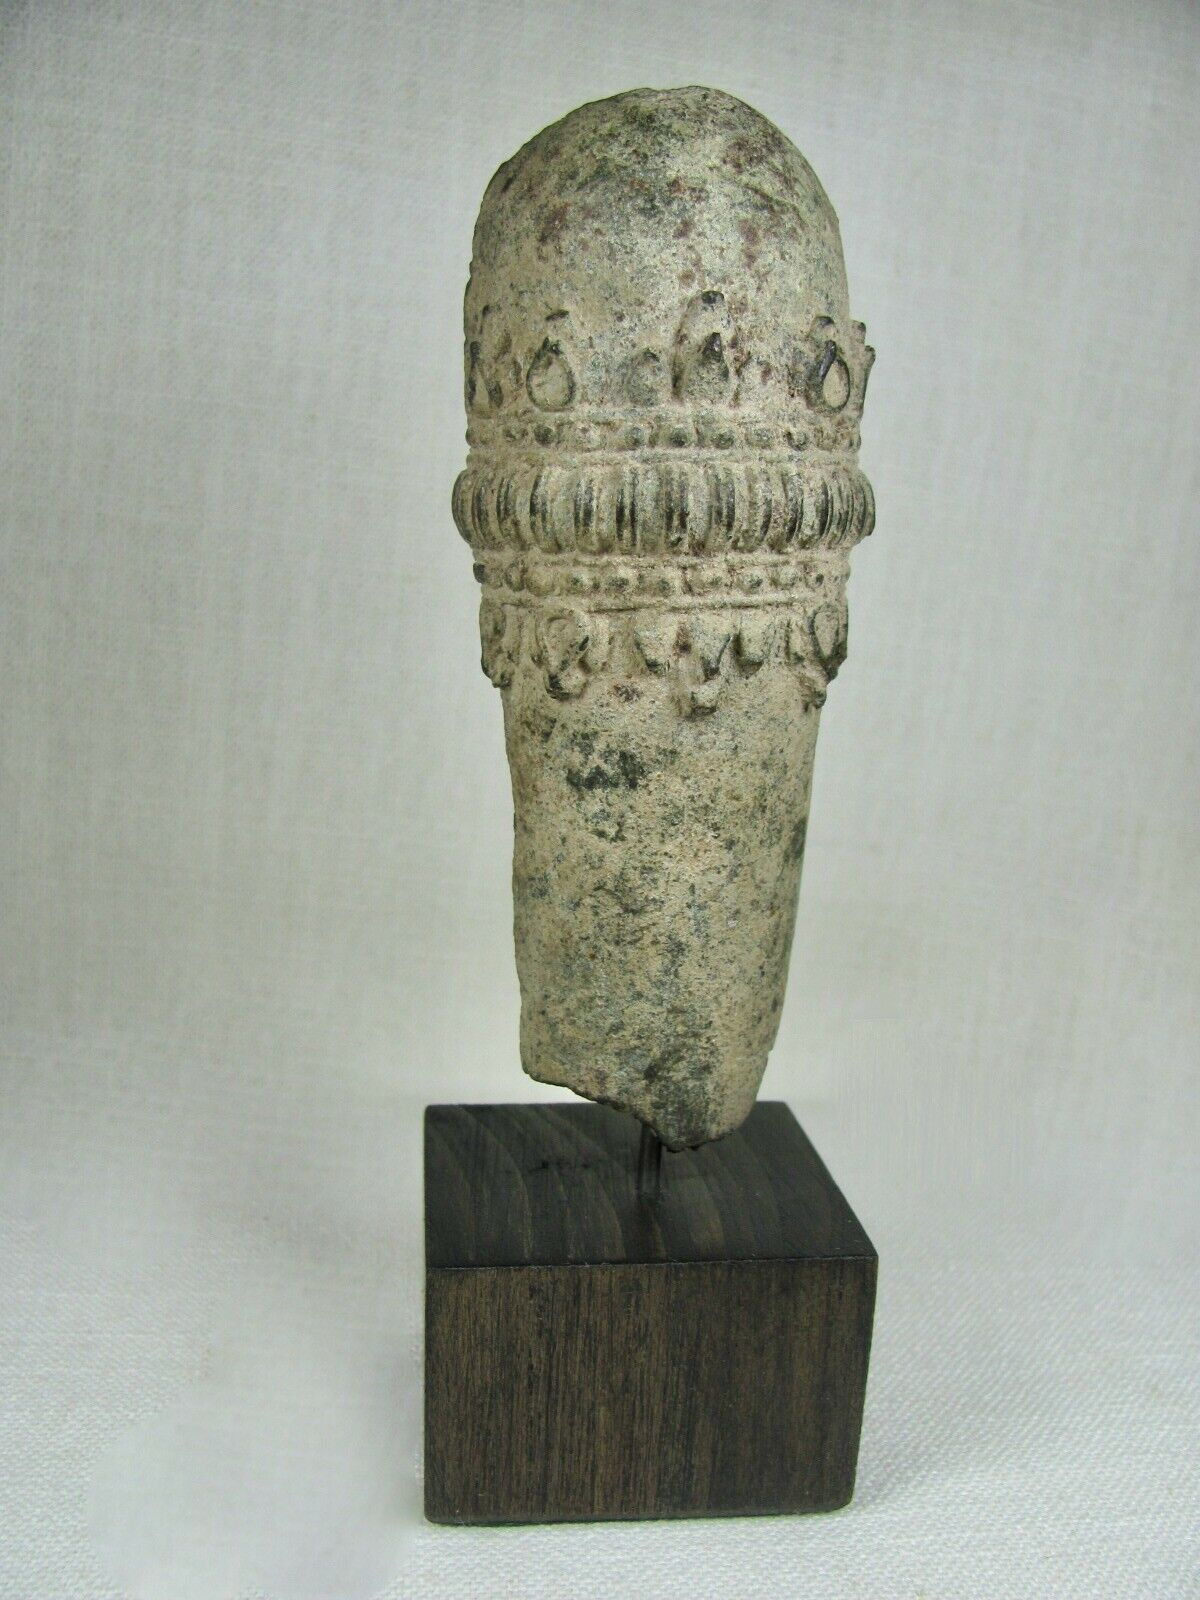 Mounted Antique Bronze Buddhist Arm Fragment From Thailand